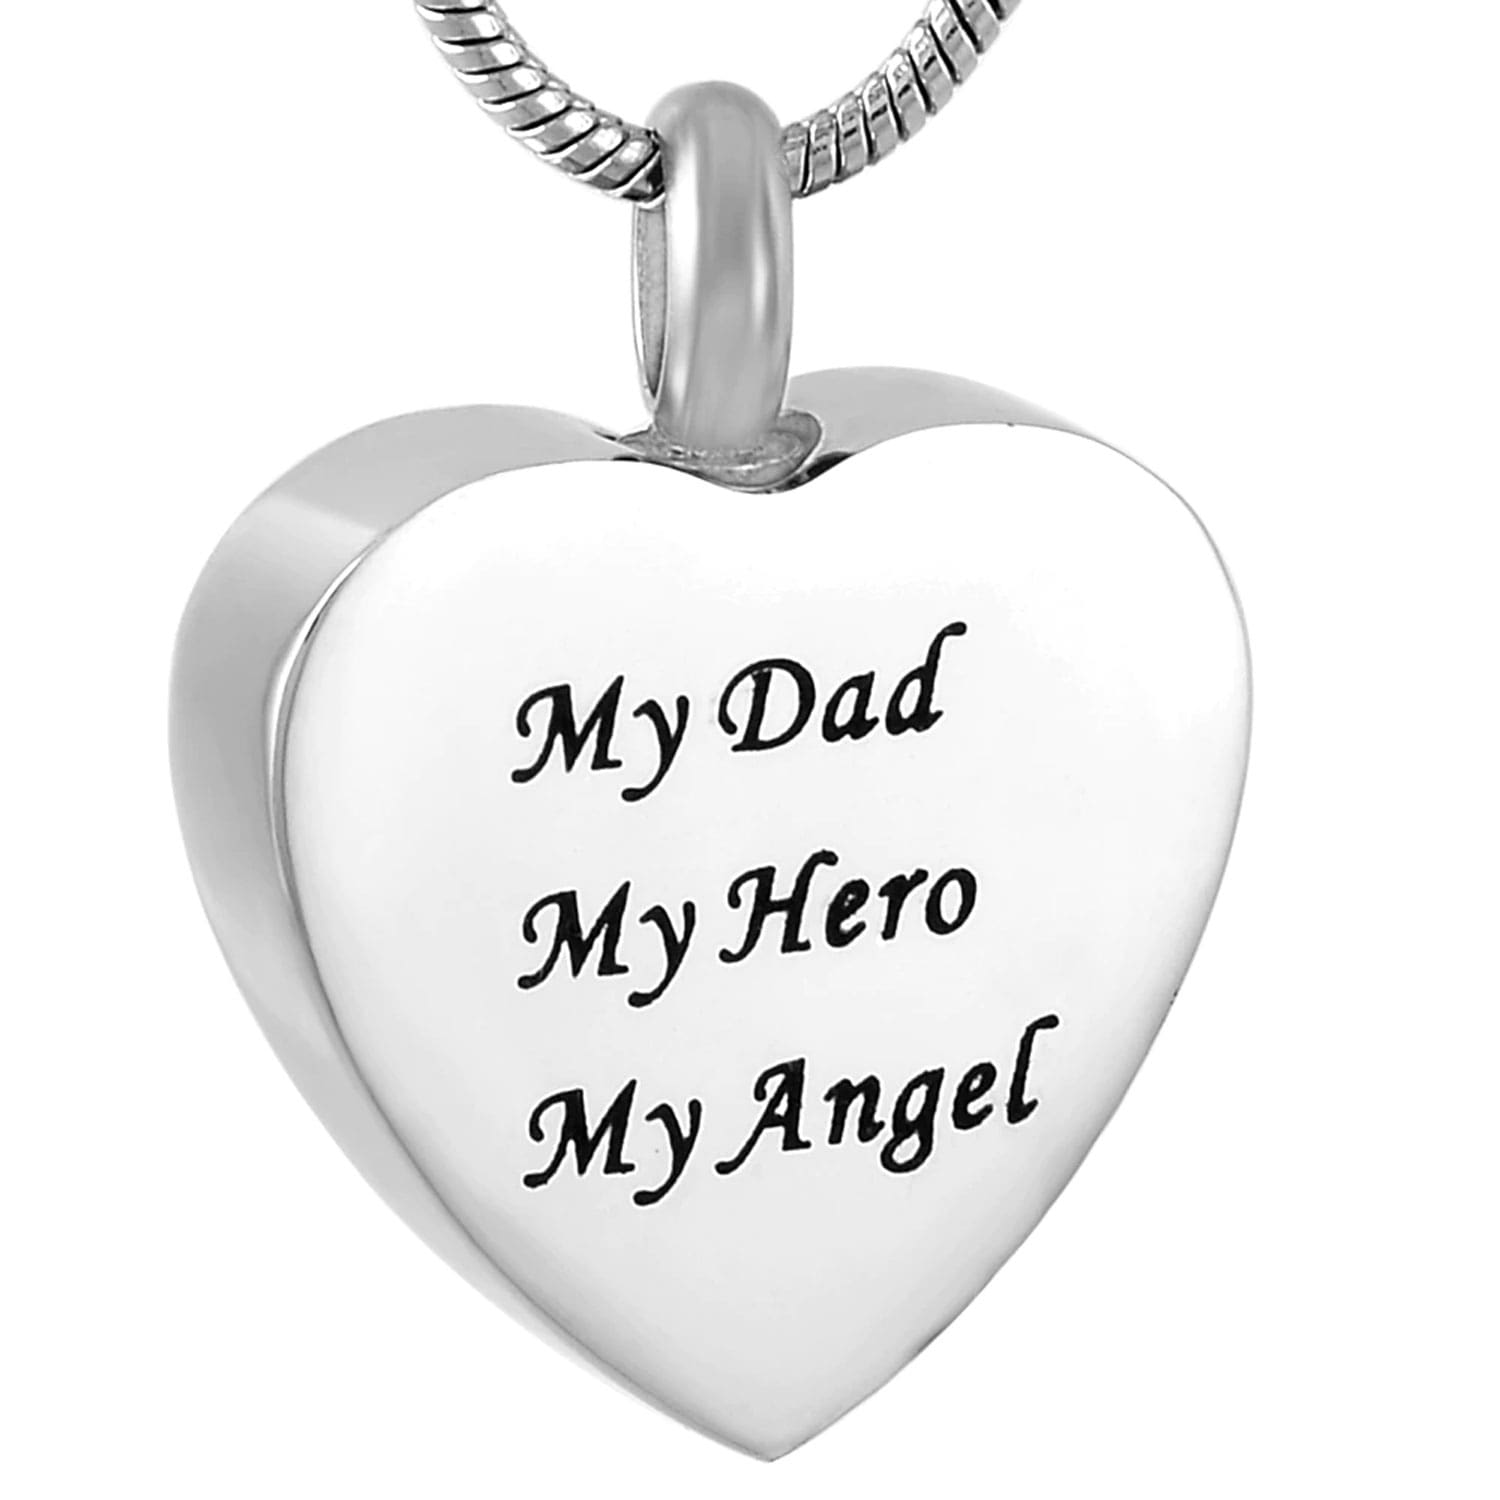 Buy CALANDIS Waterproof Stainless Steel Heart Cremation Keepsake Urn  Necklace Dad at Amazon.in